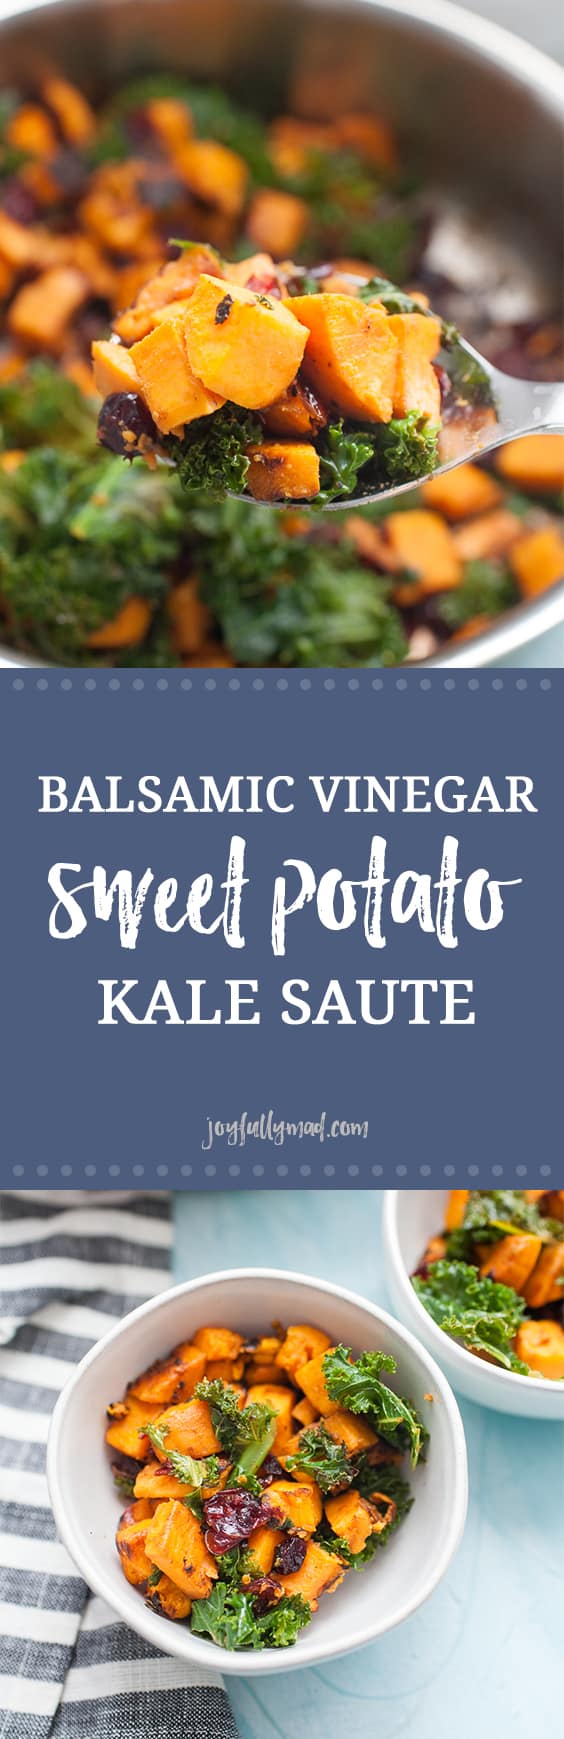 In need of a quick but delicious side dish for dinner? This sweet potato and kale saut? is perfectly delicious and easy to make. The sweet potatoes are the star of this show, but the red onions, cranberries, kale and a splash of balsamic vinegar make this dish robust in flavor! easy side dish | side dish ideas | sweet potatoes | kale | red onions | onions | cranberries | balsamic vinegar